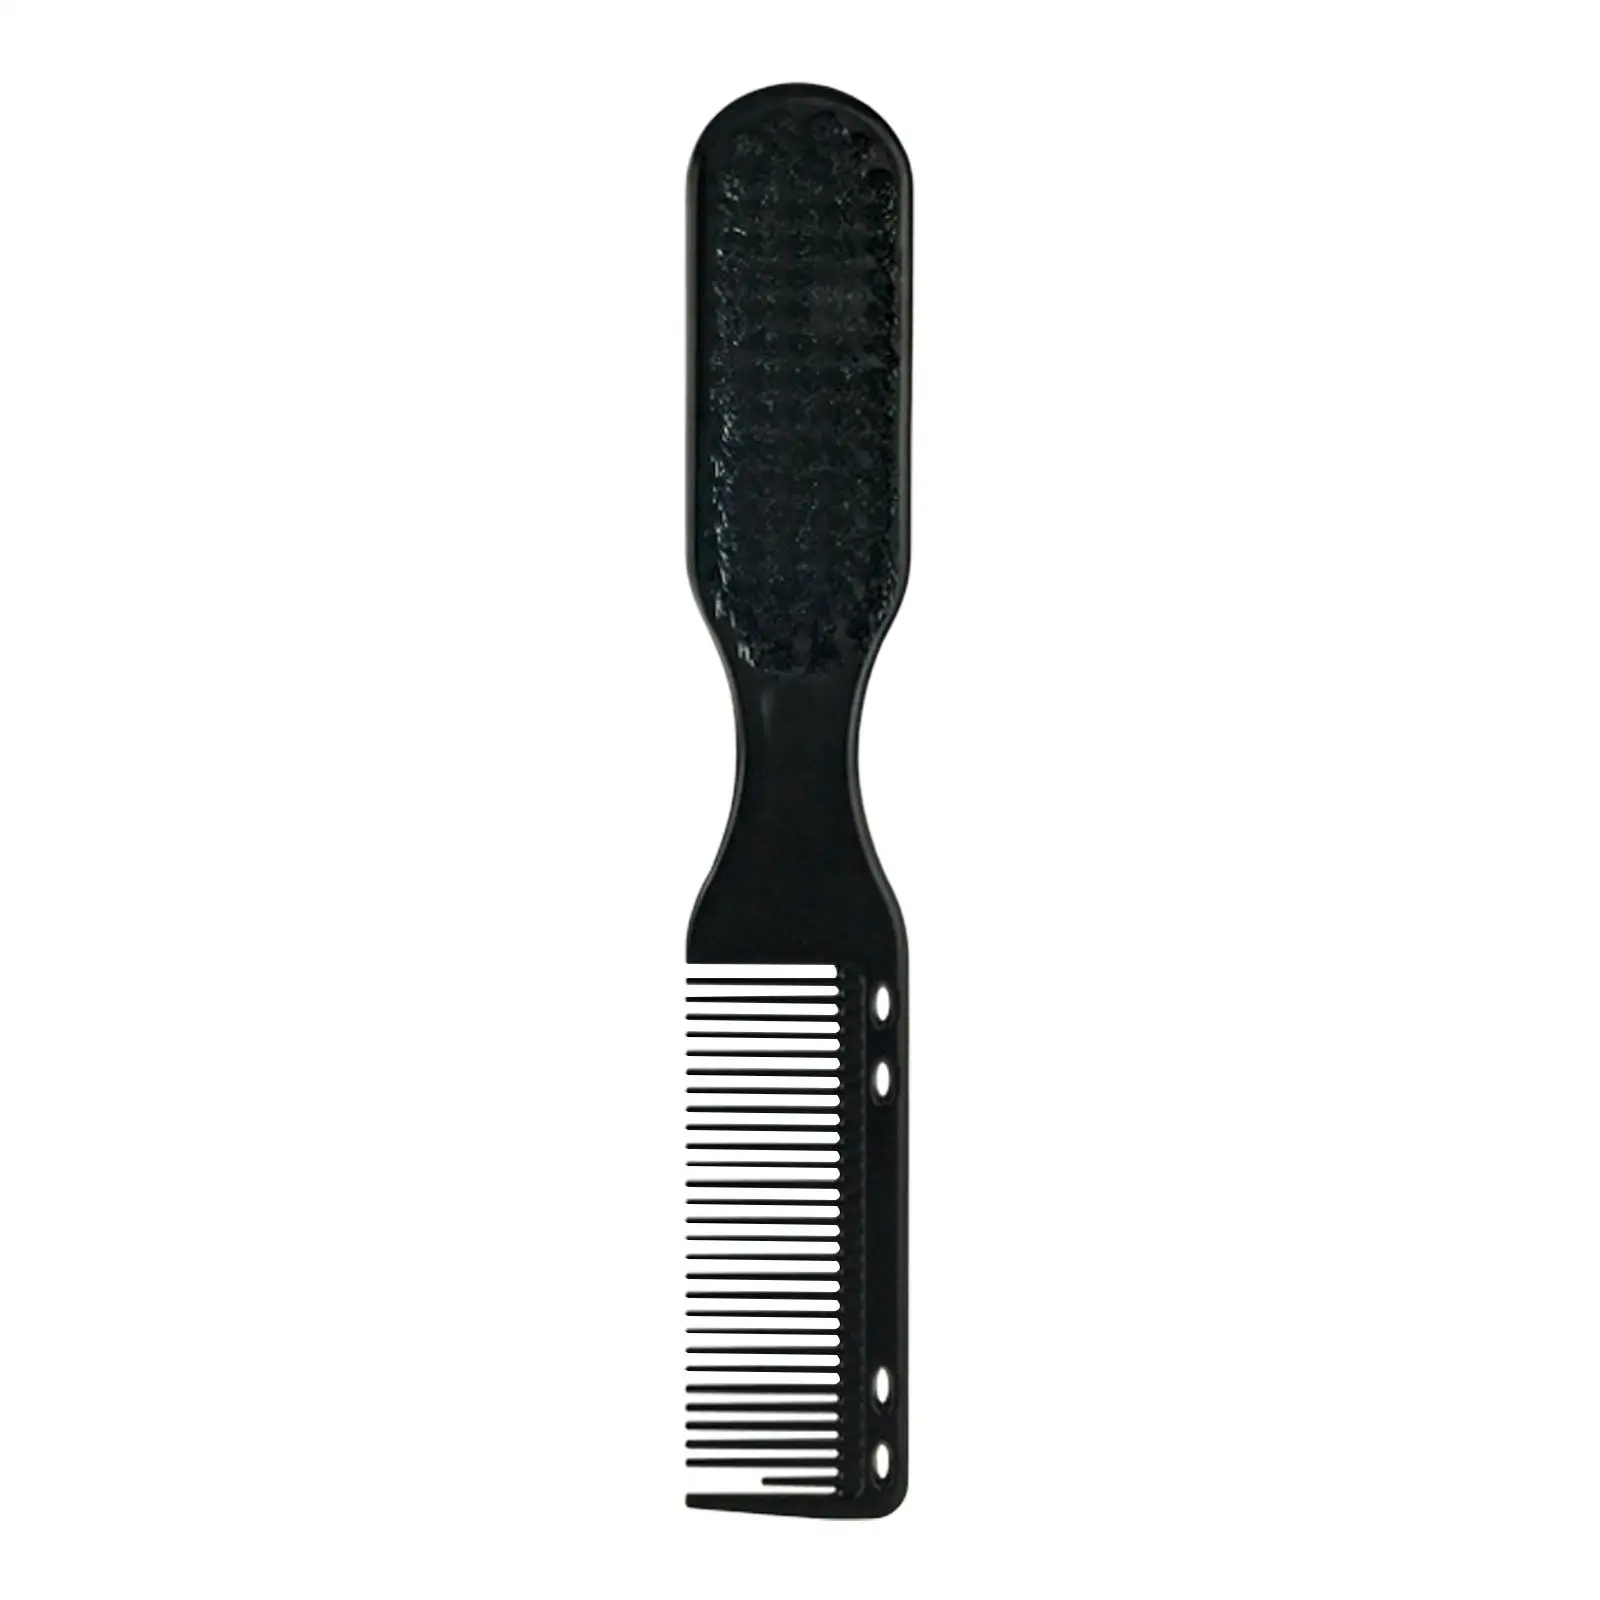 Barber Comb Brush Cleaning Brush Portable for Haircuts Hairdressers Salon